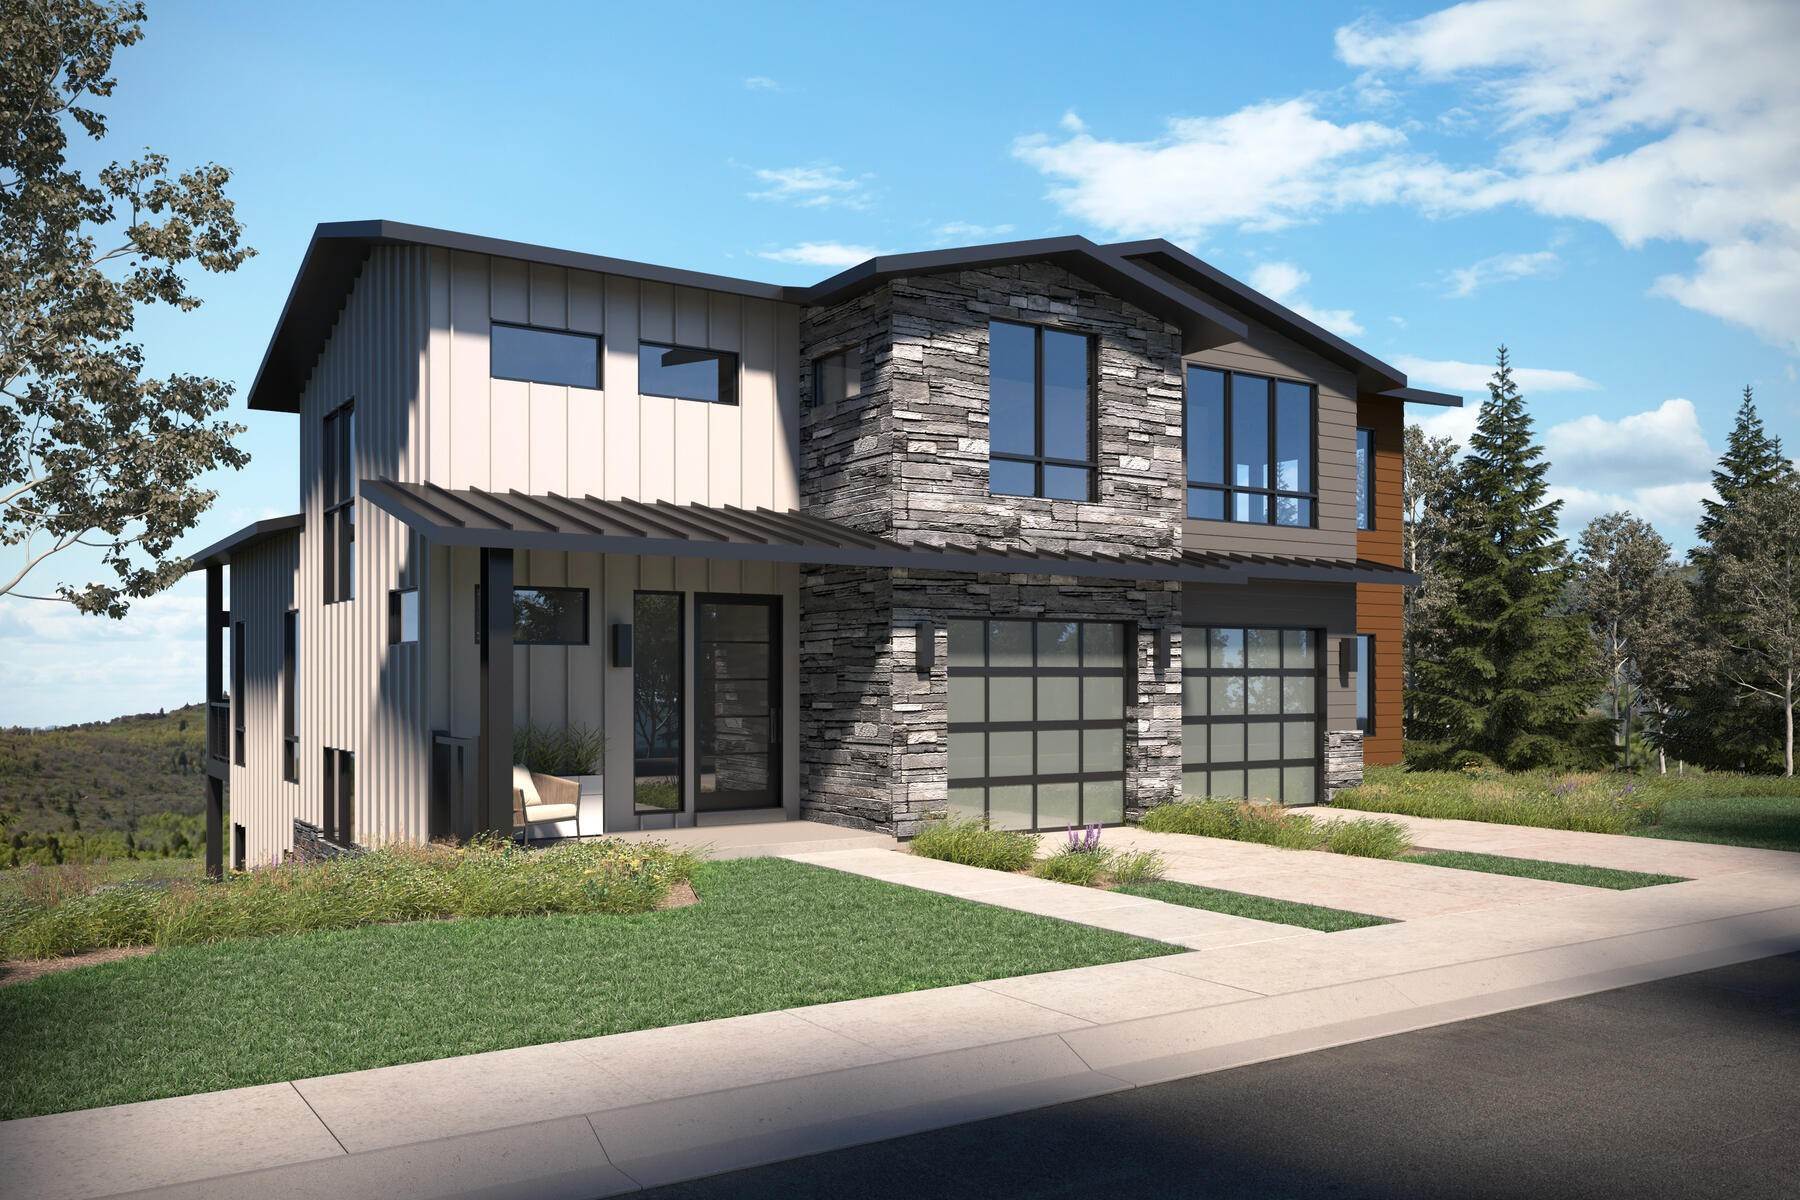 Single Family Homes for Sale at A Park City Residential Development Surrounded By 1,000 Acres Of Open Space 4060 West Crest Court, Lot 315 Park City, Utah 84098 United States